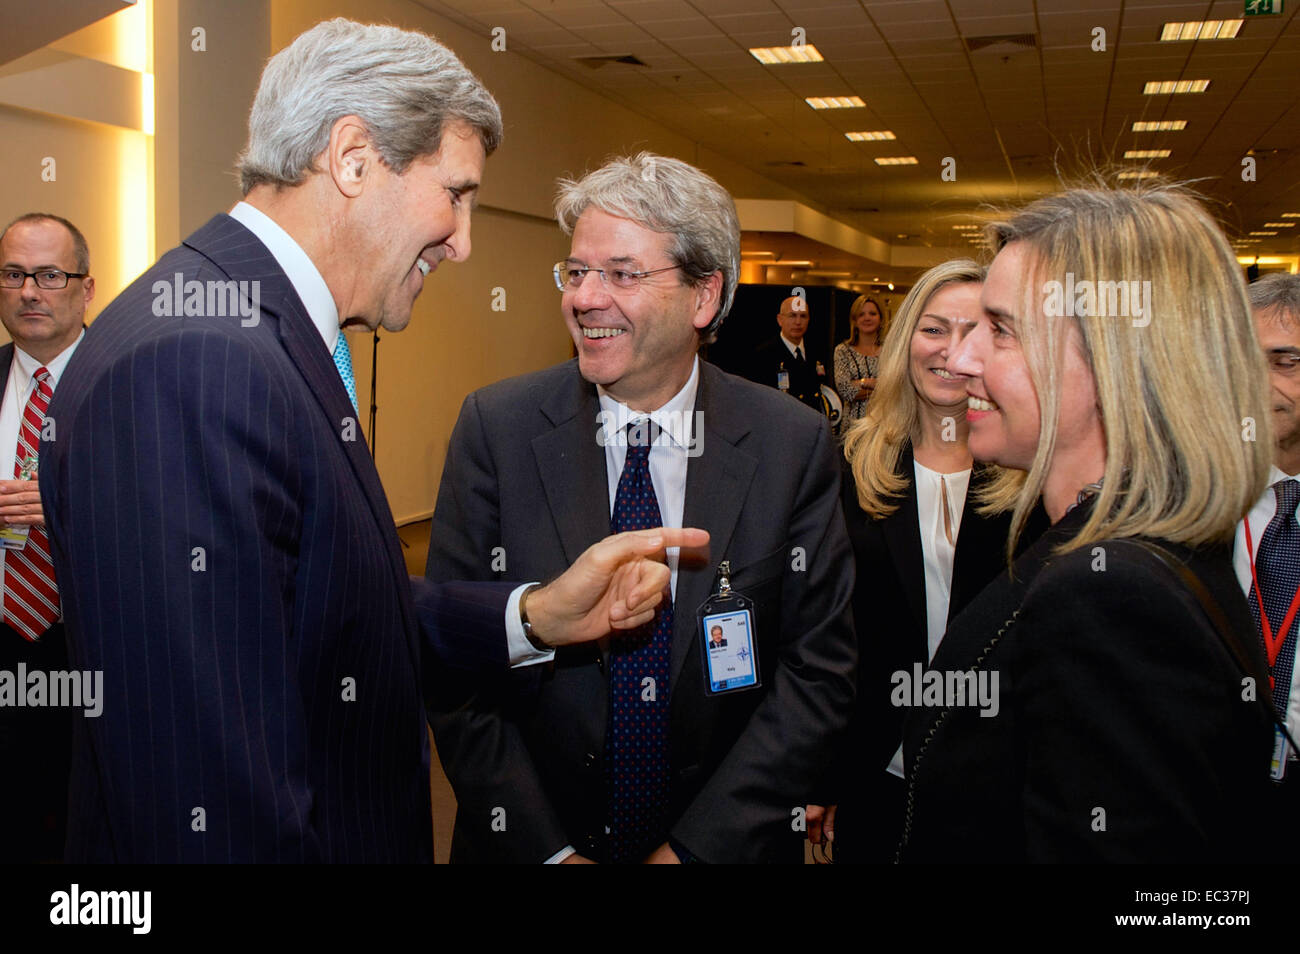 U.S. Secretary of State John Kerry chats with the new Foreign Minister of Italy, Paolo Gentiloni, after being introduced by European Union High Representative Federica Mogherini, the previous Italian Foreign Minister, between a series of multinational meetings on December 2, 2014, at NATO Headquarters in Brussels, Belgium. Stock Photo